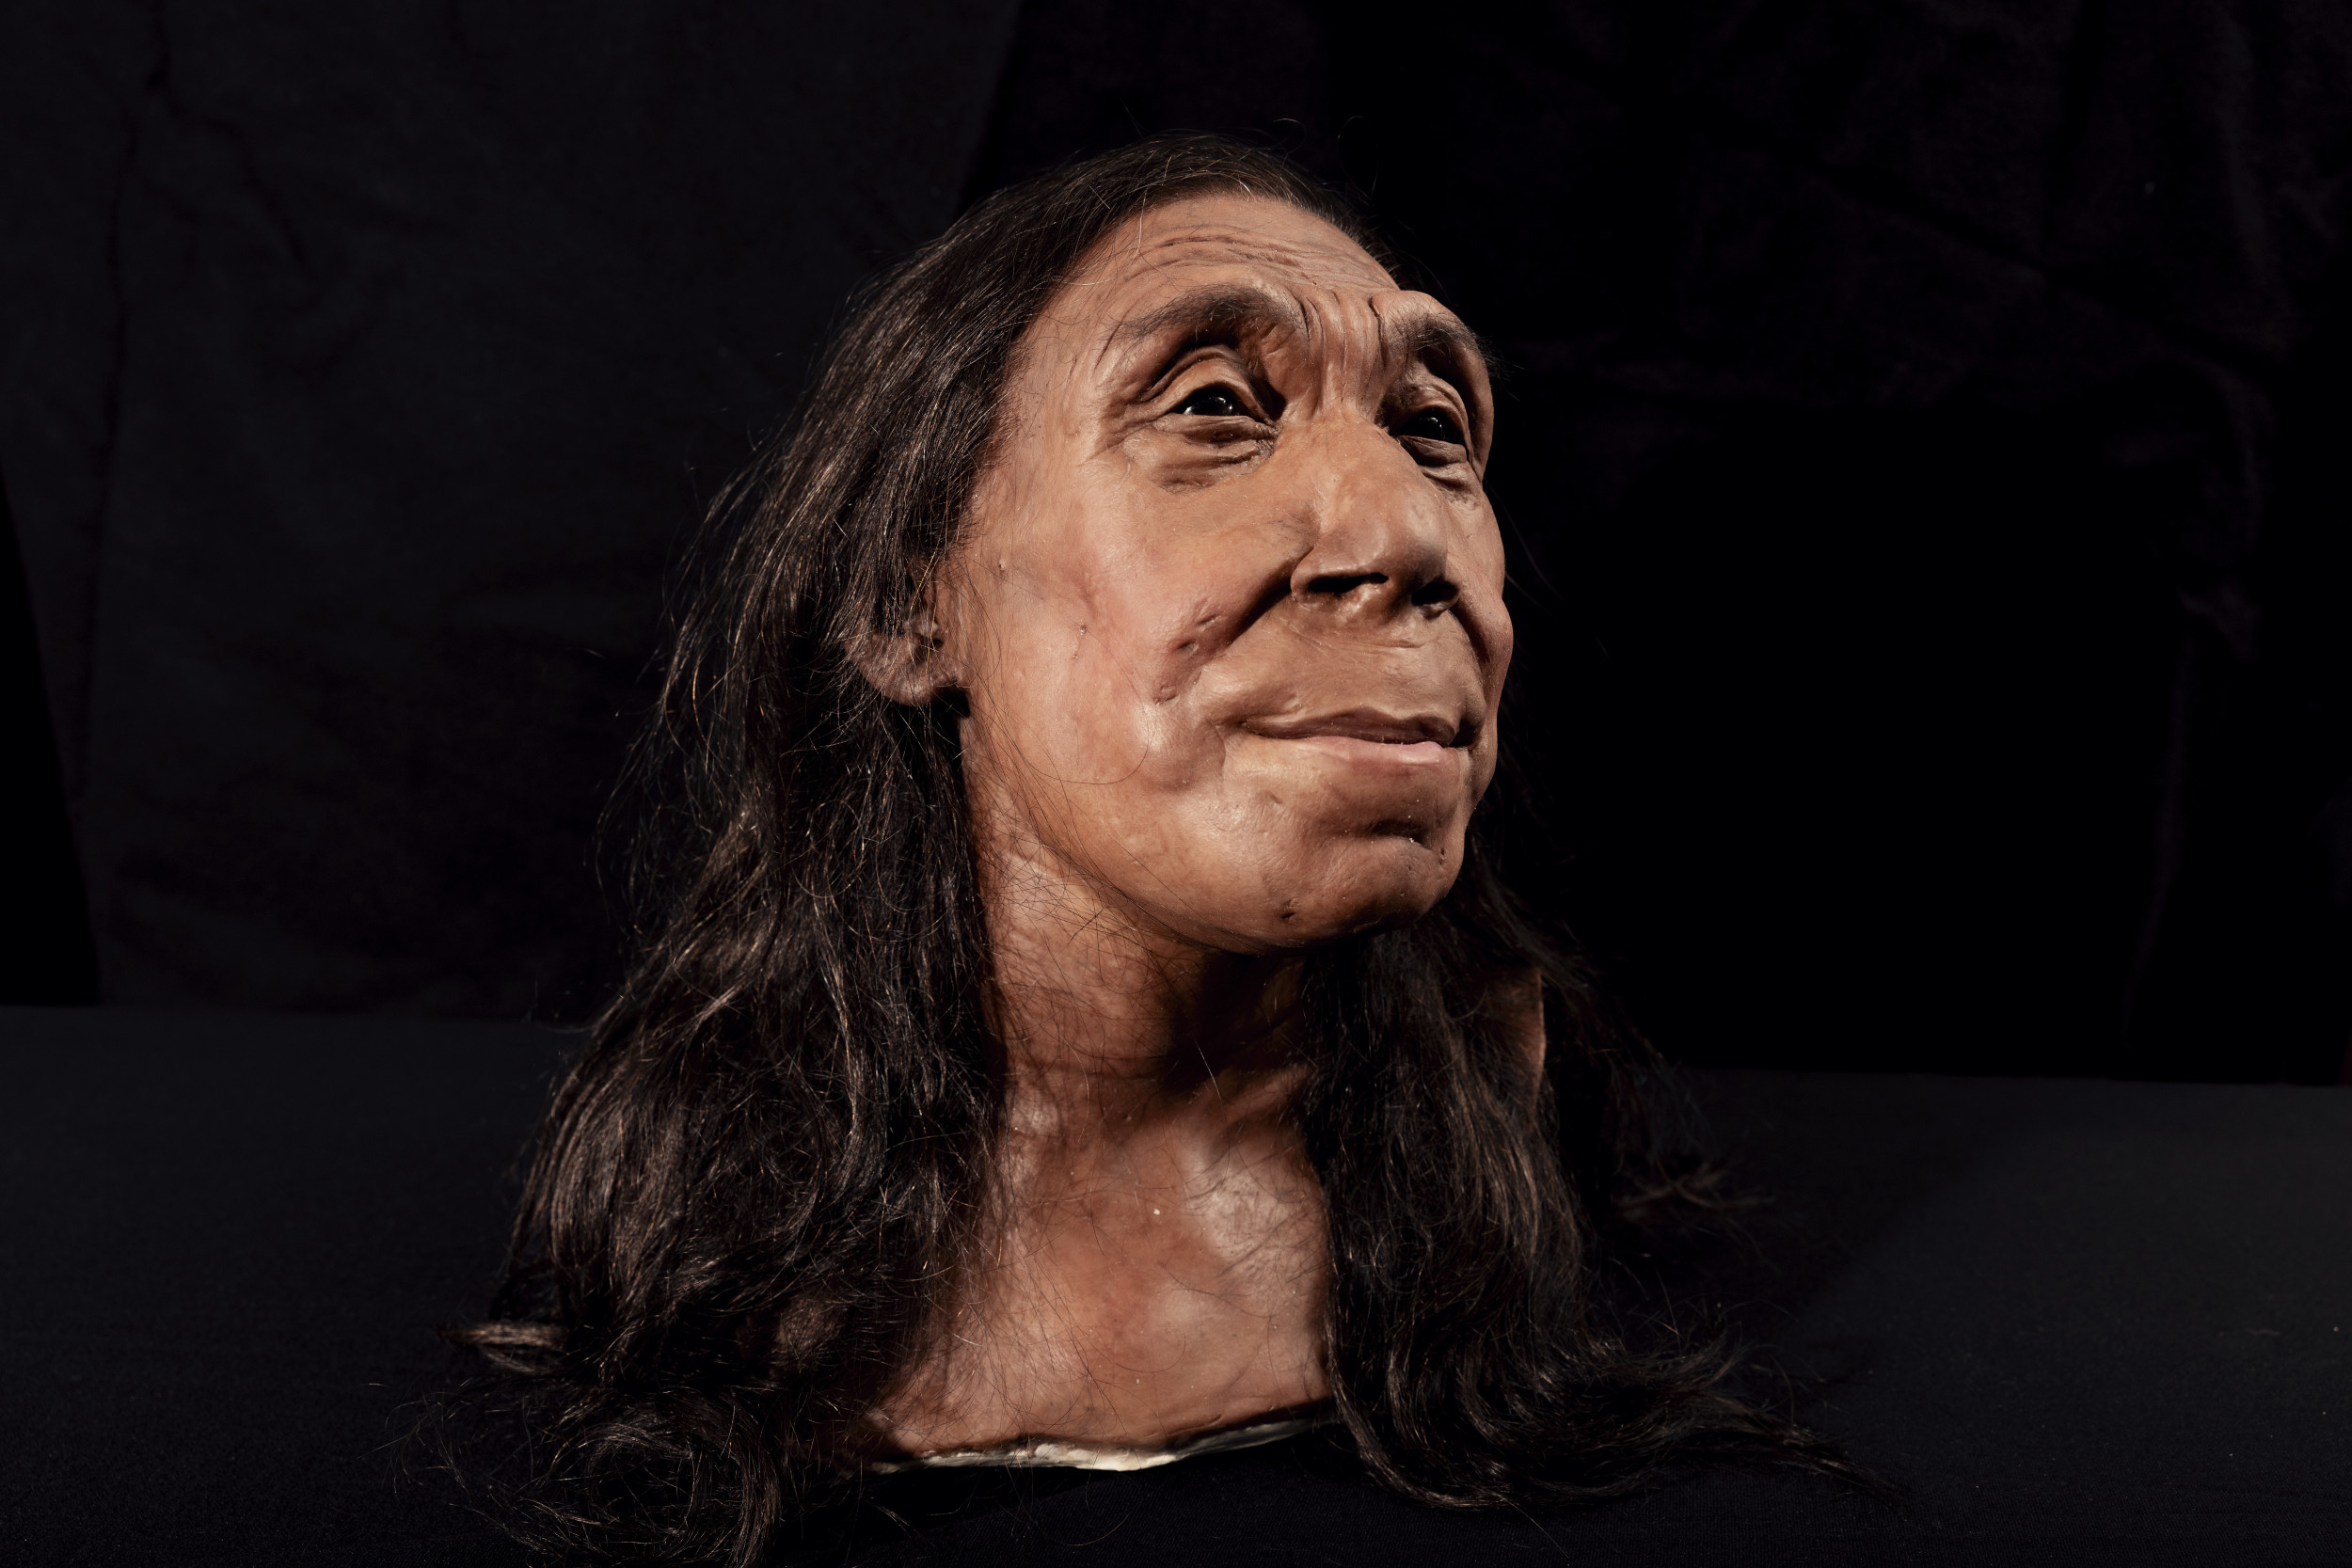 Face of Neanderthal woman revealed 75,000 years later